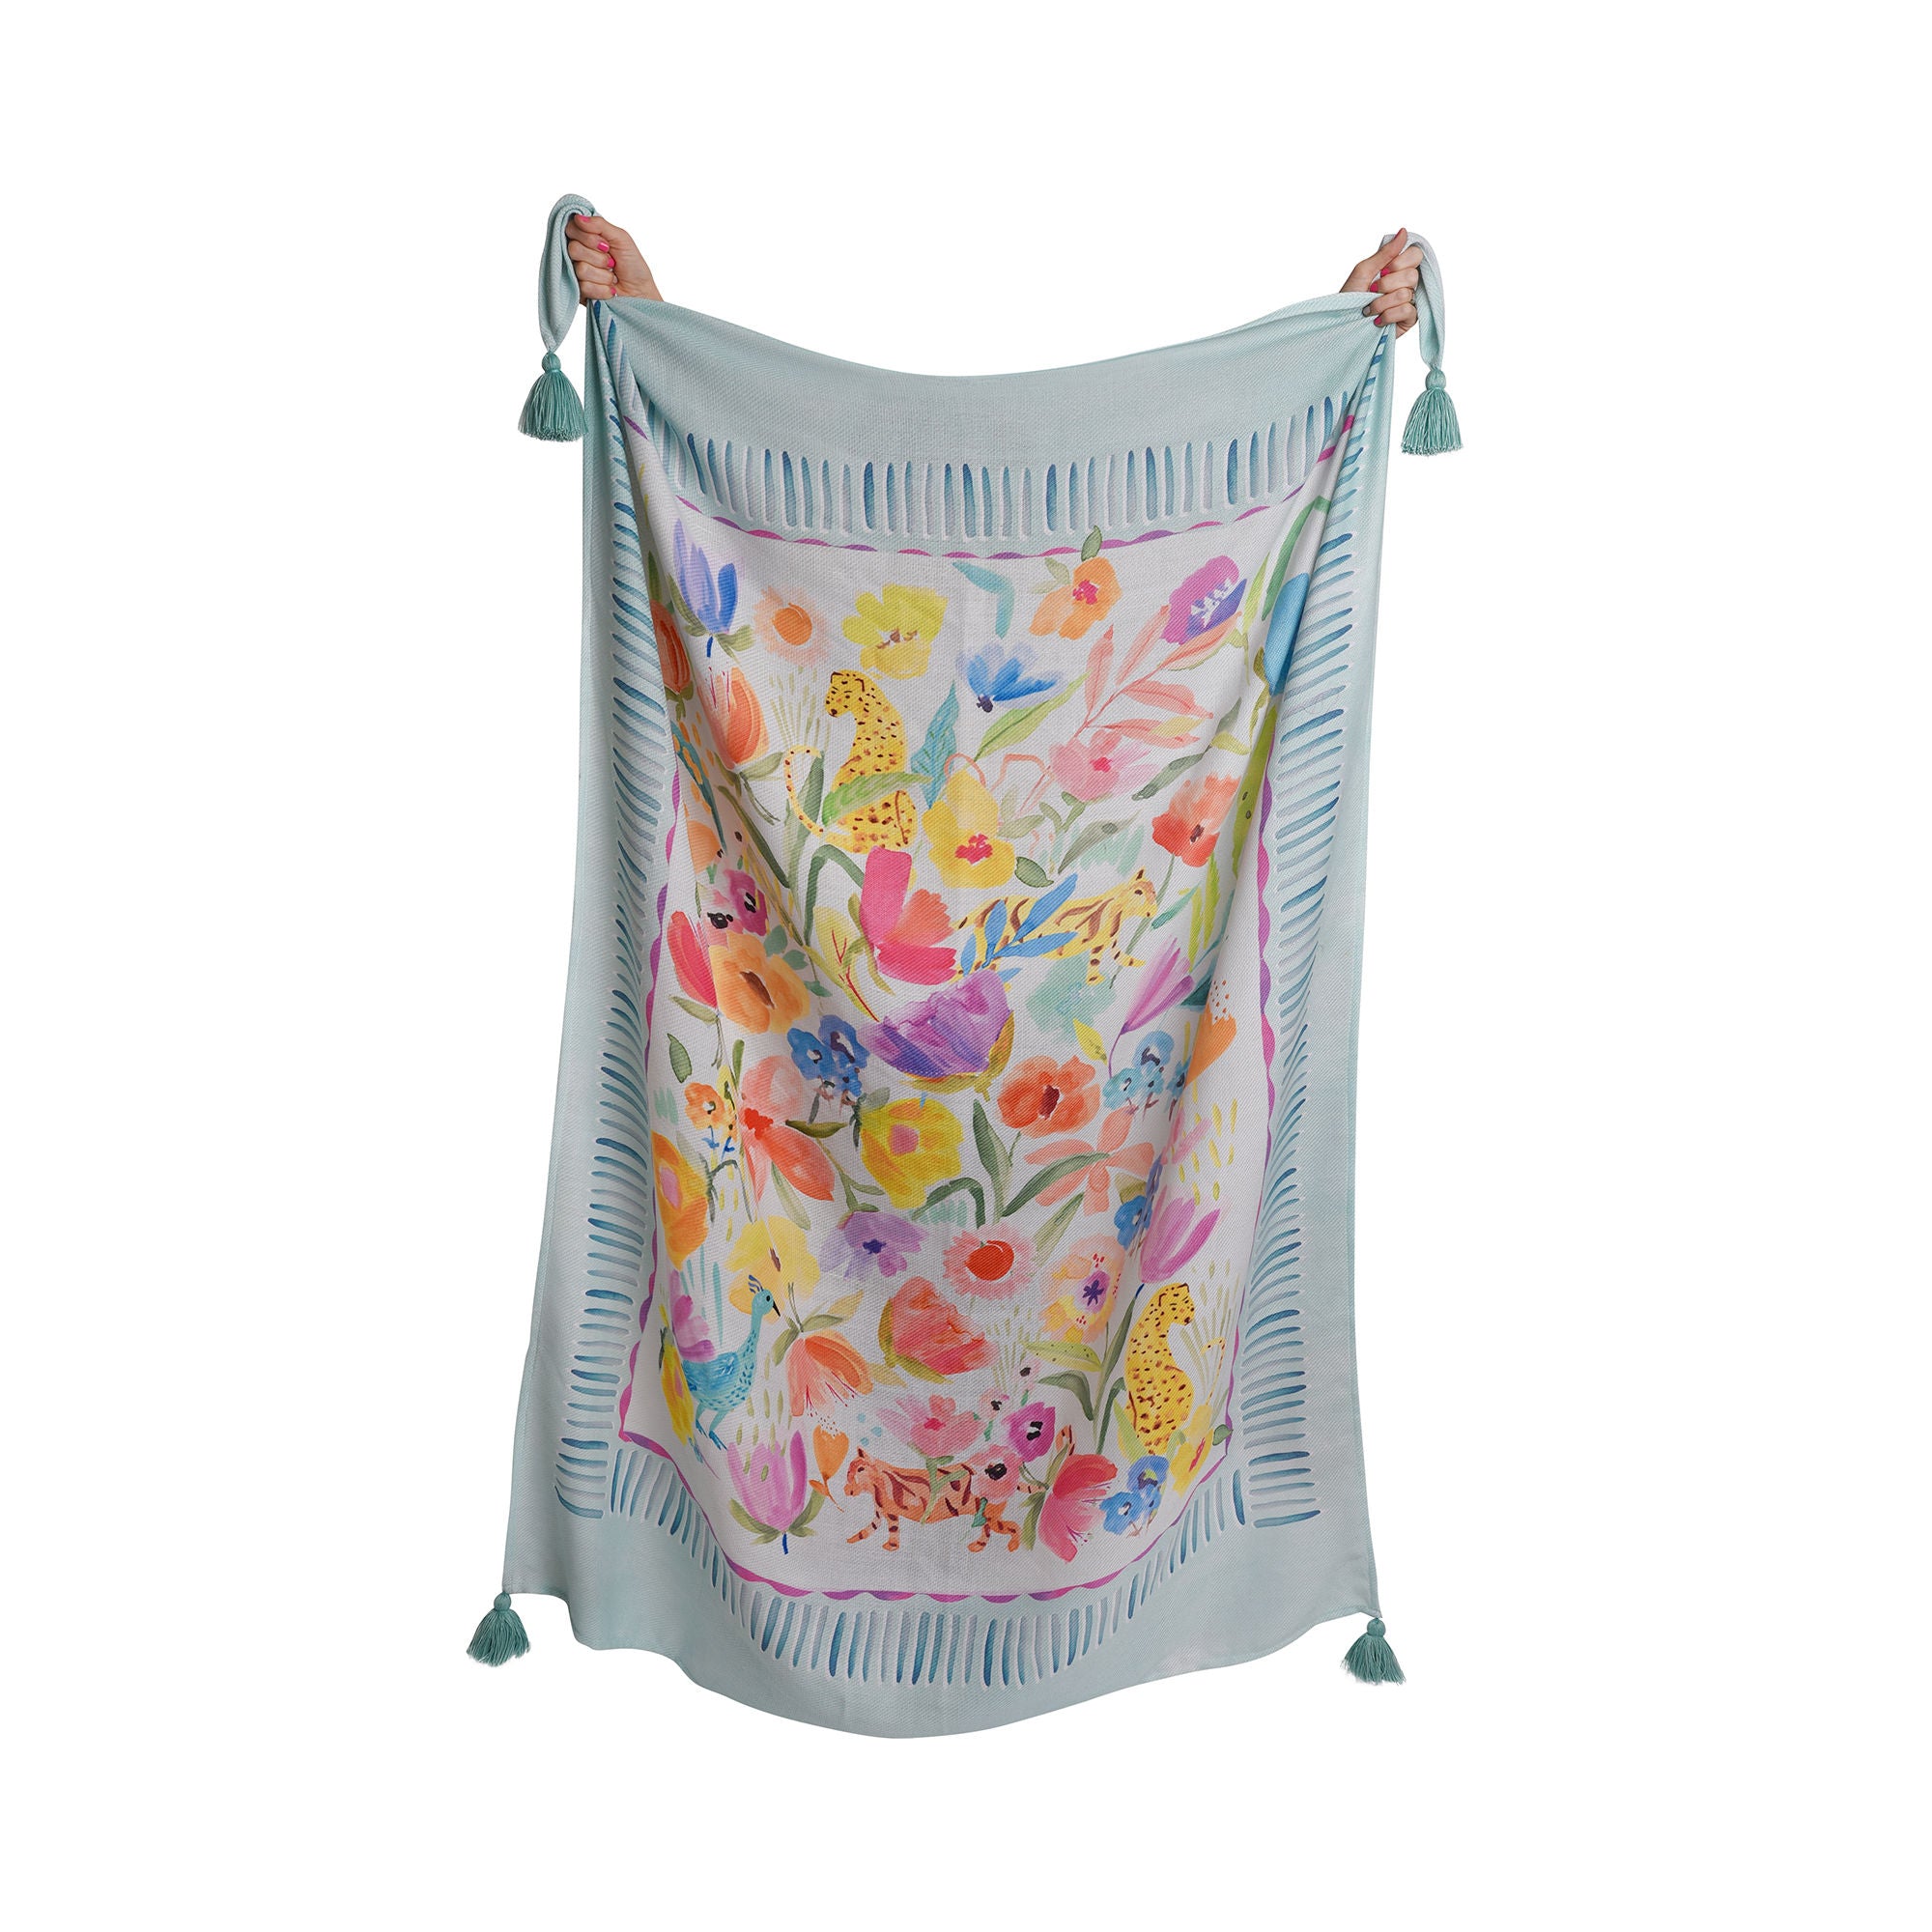 Festival Throw by Appletree Style in Duck Egg 130 x 180cm - Throw - Appletree Style